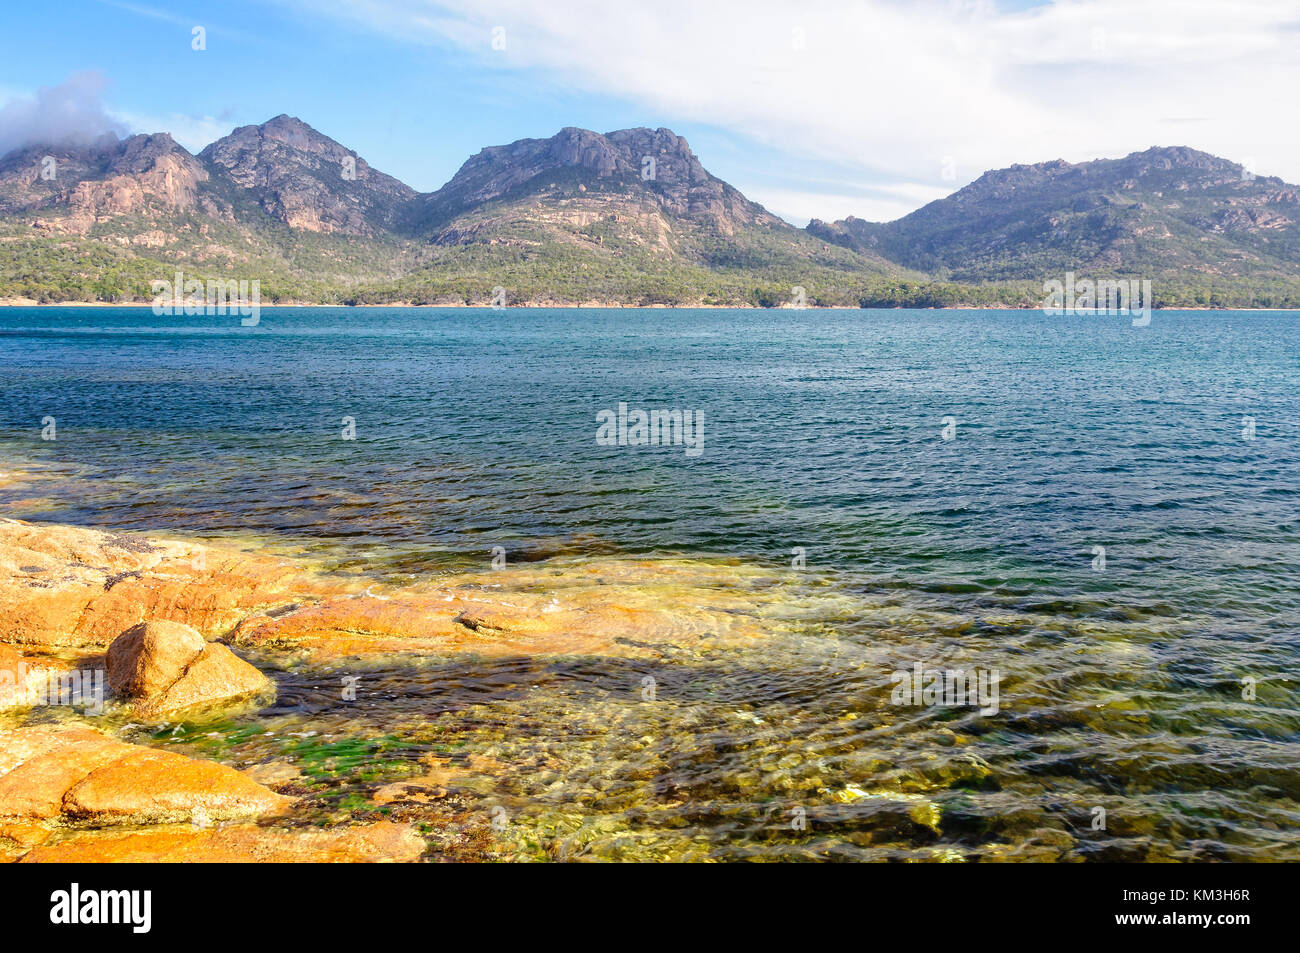 The Hazards mountain ranges in the Freycinet National Park photographed from Coles Bay - Tasmania, Australia Stock Photo